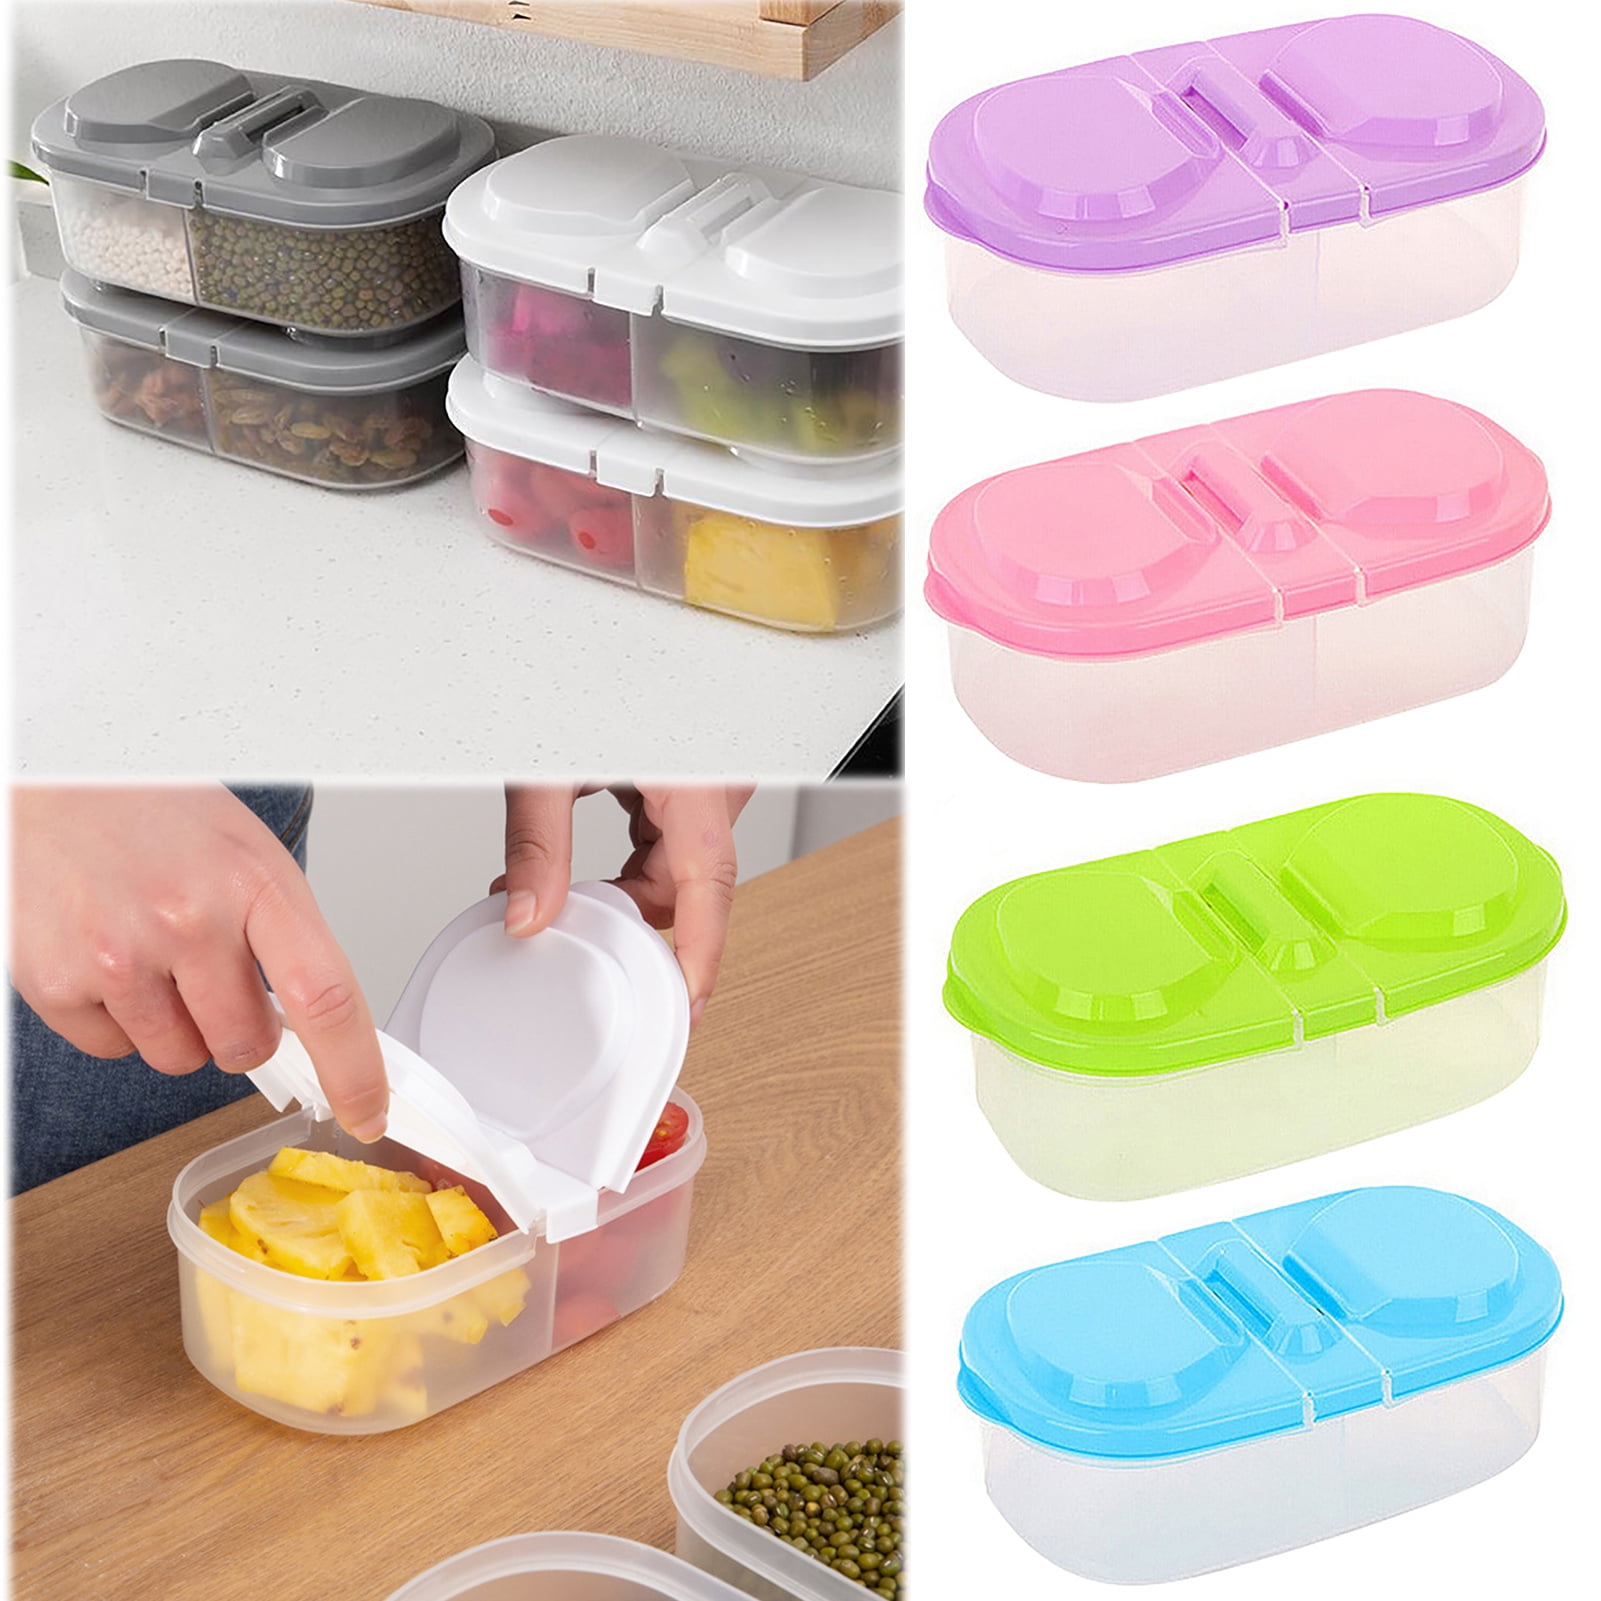 Typutomi 2 Compartment Snack Containers, 5PCS Food Storage Containers with  Lids Bento Box Portable Freezer Storage Containers for Refrigerator Cabine